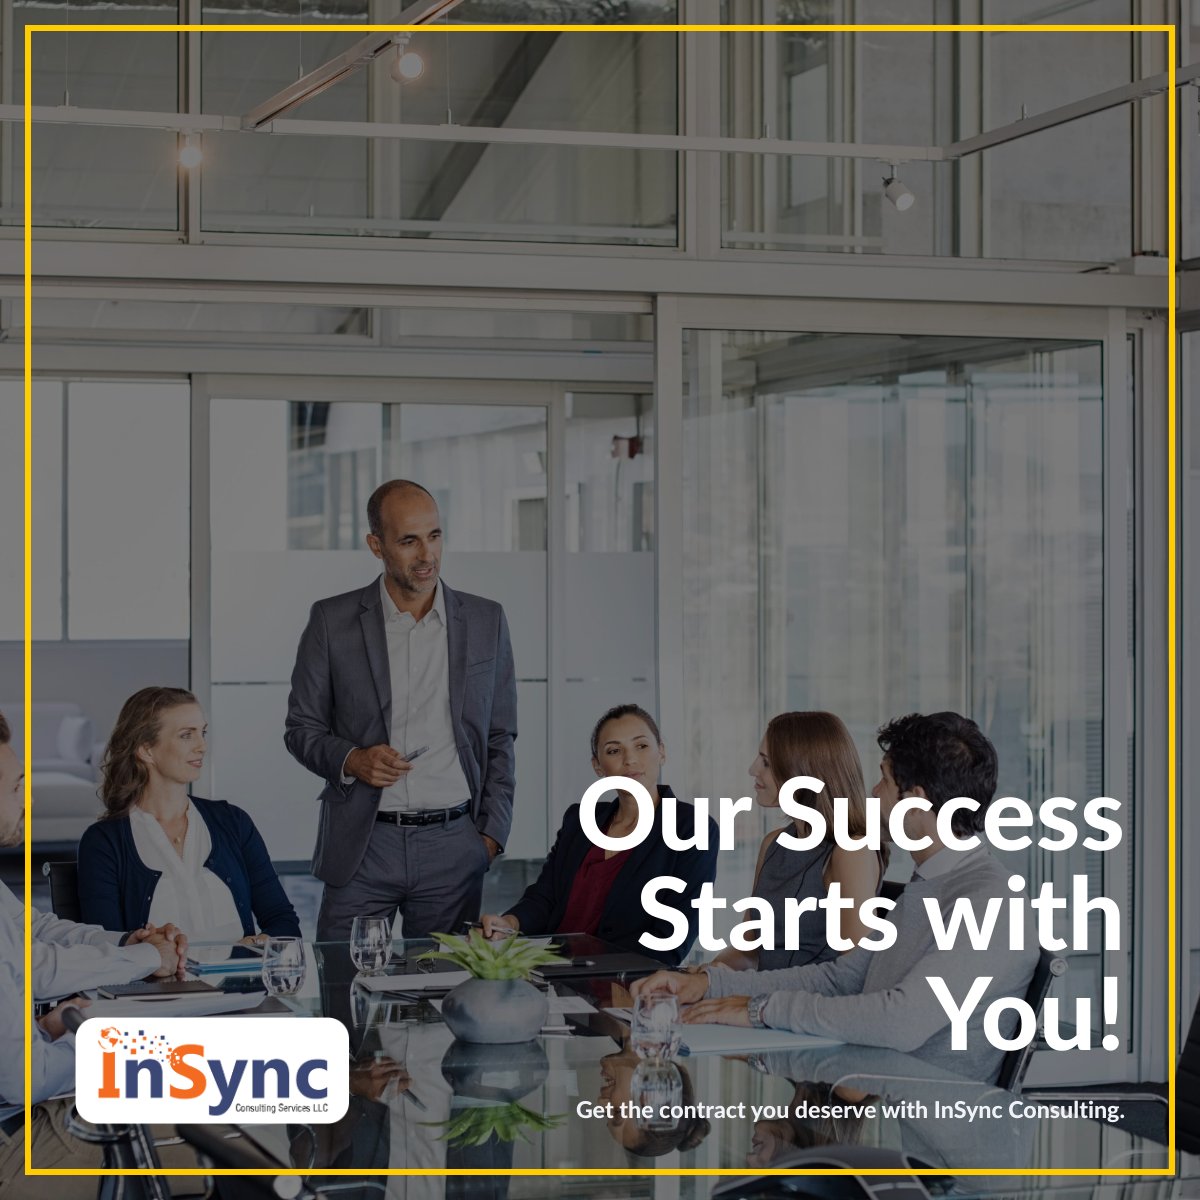 Providing the country exceptional professionals. Visit us at insynconline.net #nurse #IT #nursing #ITJobs #nursepractitioner #payroll #benefits #aprn #nursesrock #nurselife #insyncnursing #insync #travelnursing #travelnurse #rnjobs #rn #lpn #nursejobs